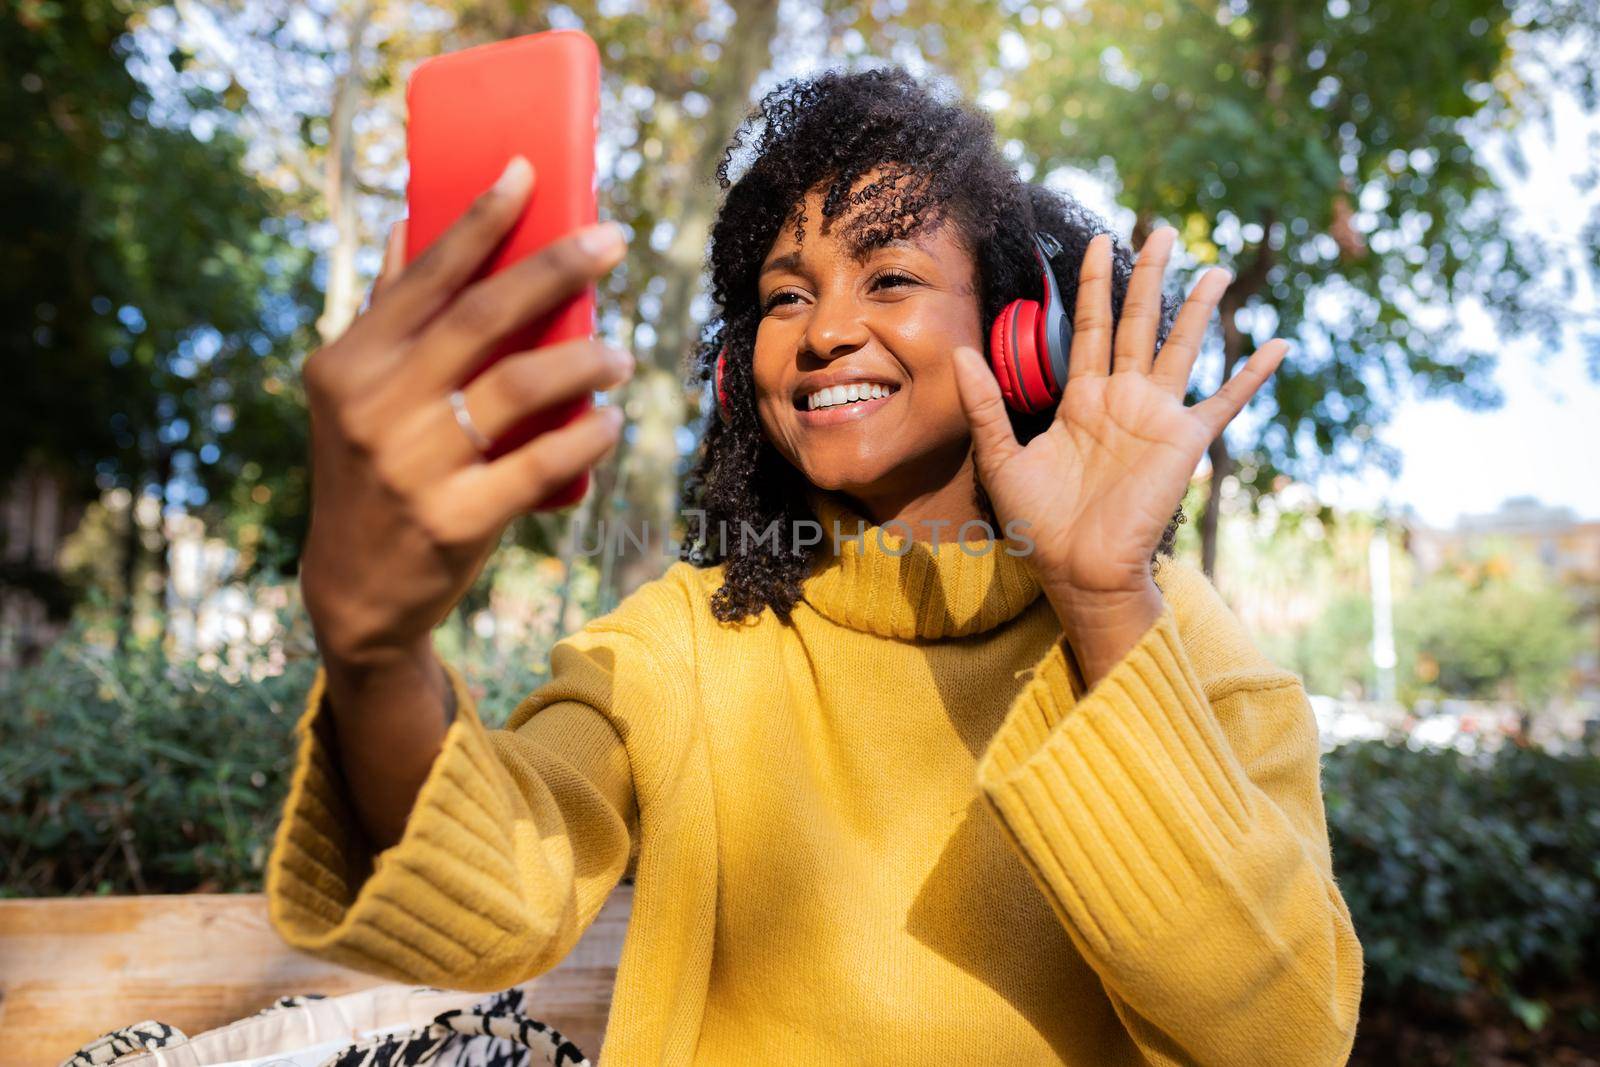 Smiling young African American woman wave hand on video call using mobile phone outdoors. Lifestyle and technology concept.